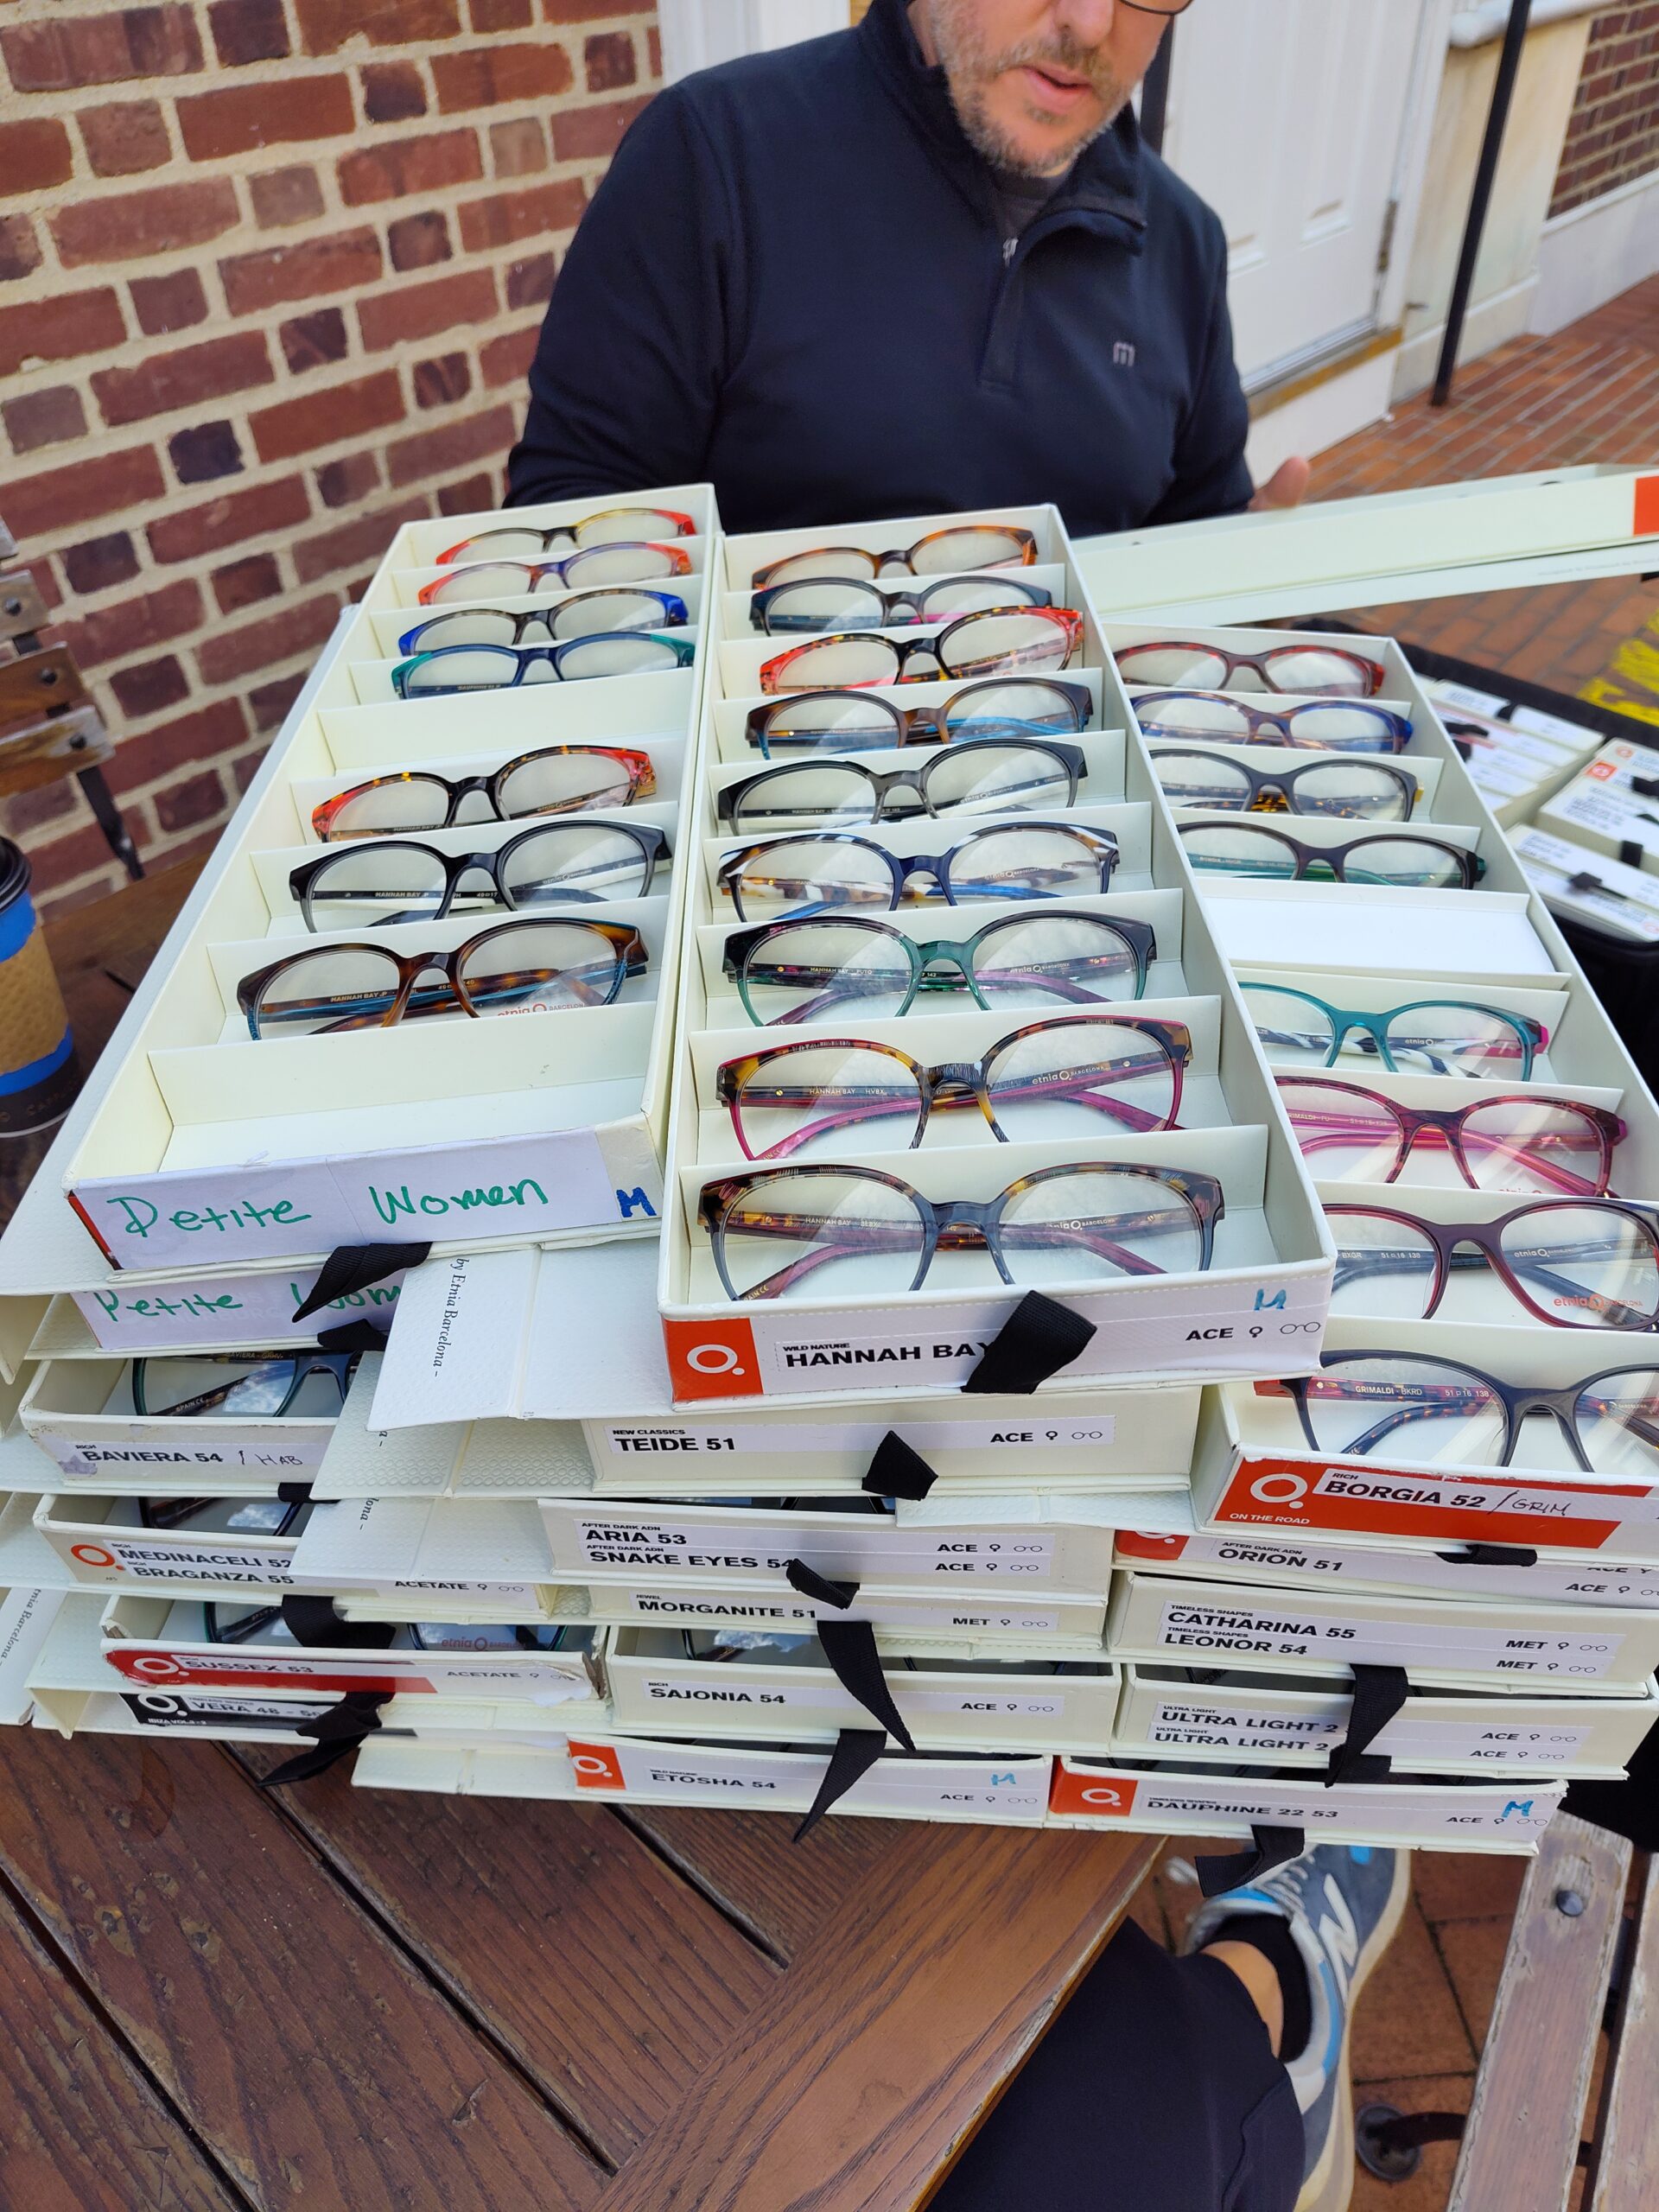 trays of colorful eyewear on display outdoors